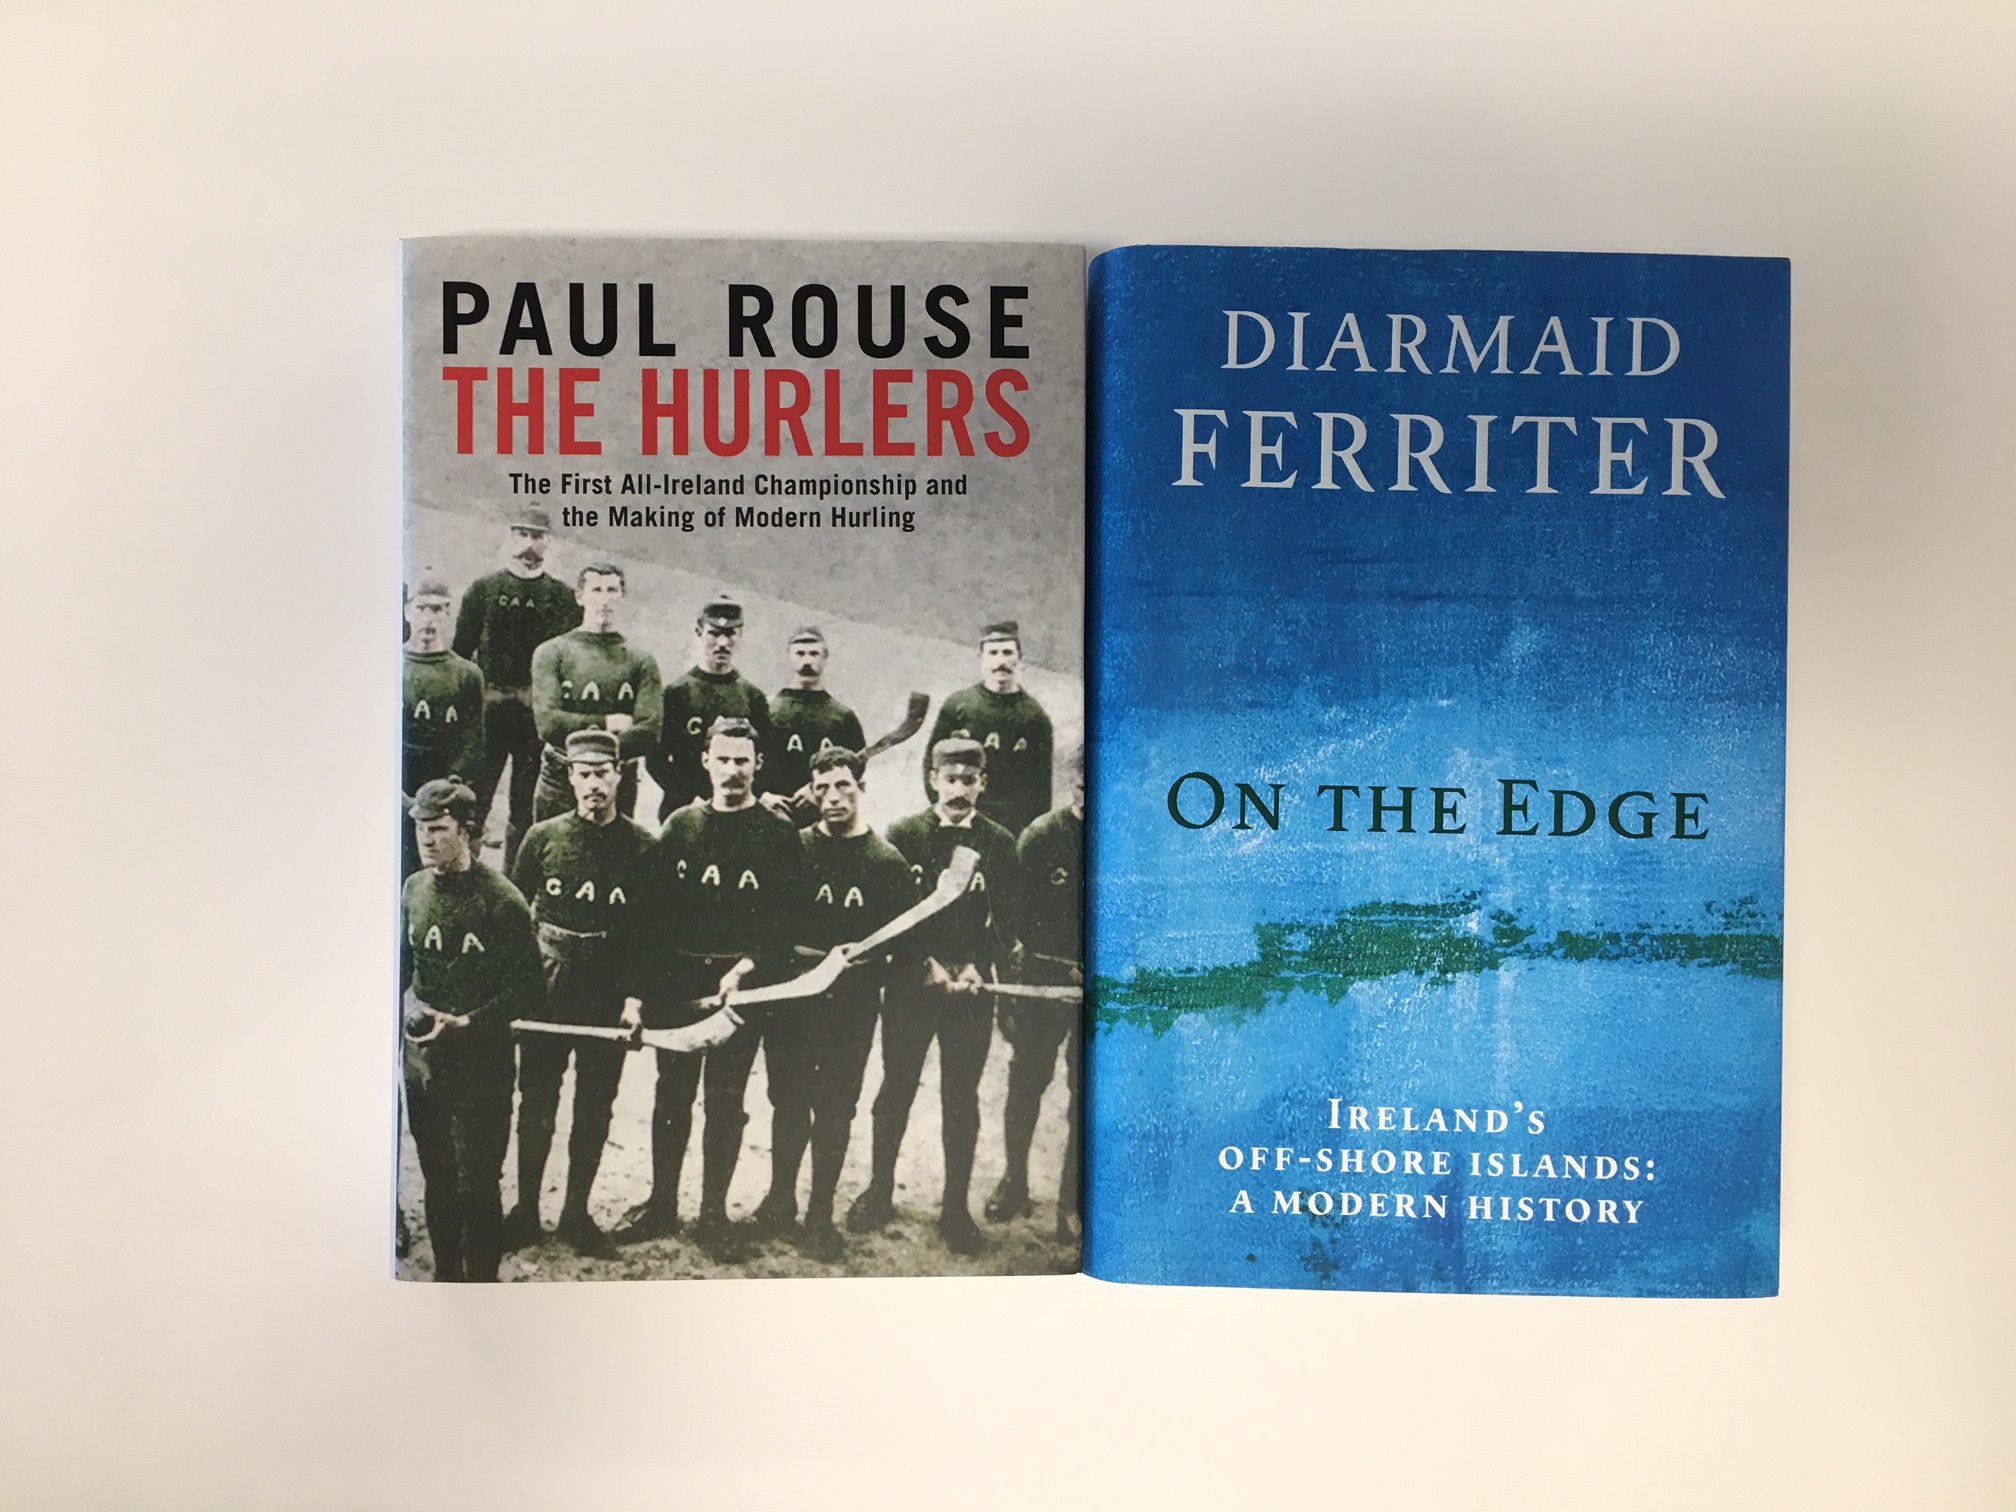 A photo of the front covers of The Hurlers and On the Edge